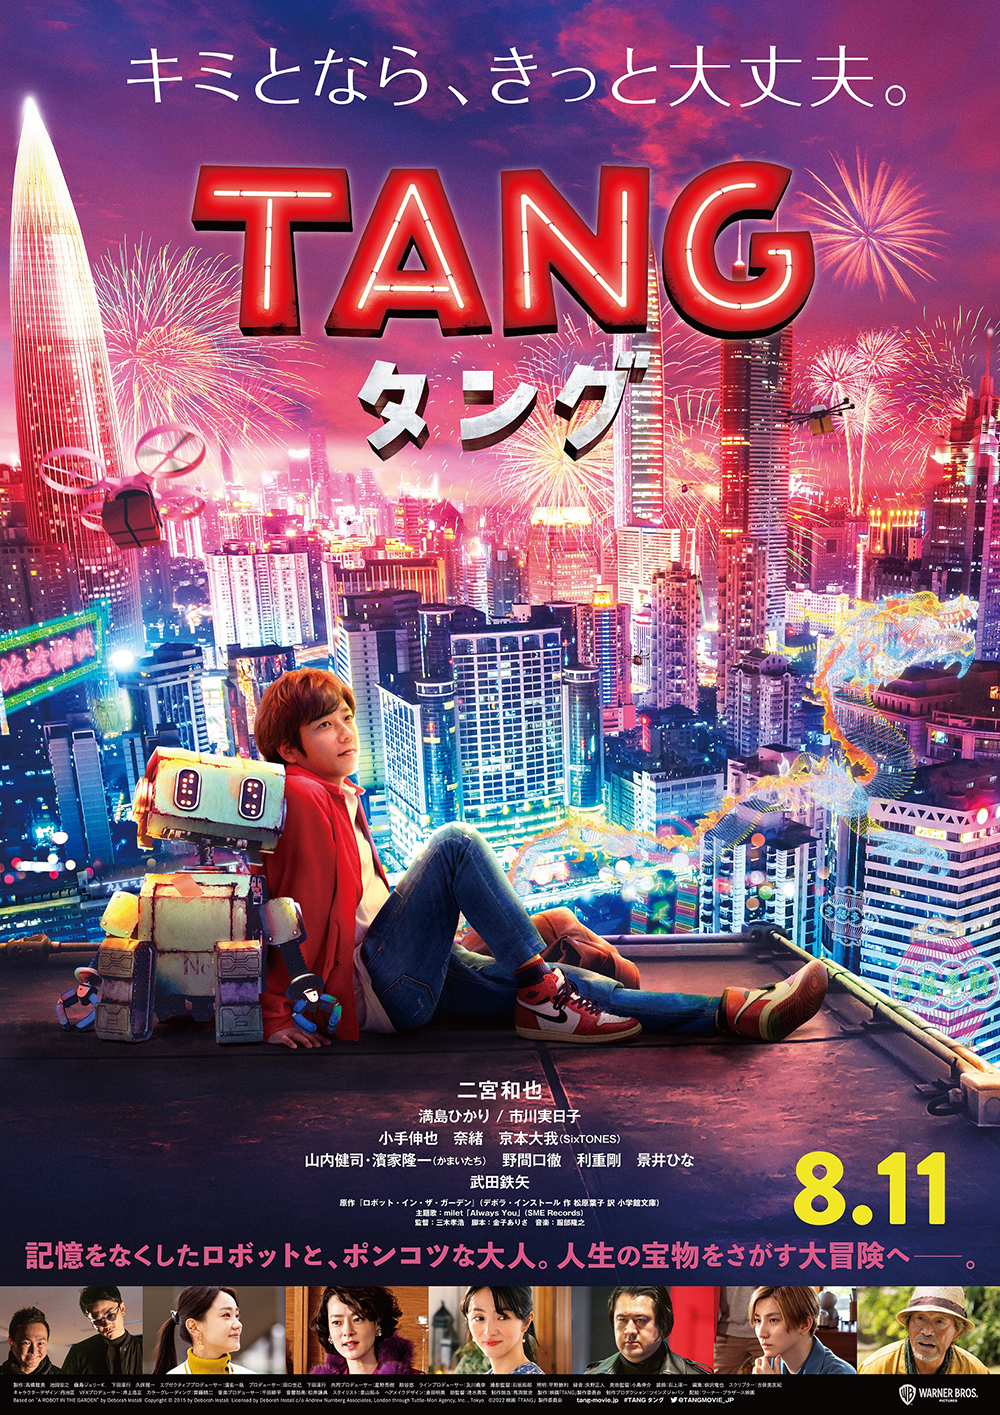 milet、二宮和也主演映画『TANG タング』主題歌「Always You」のCDリリースが決定 - 画像一覧（1/2）